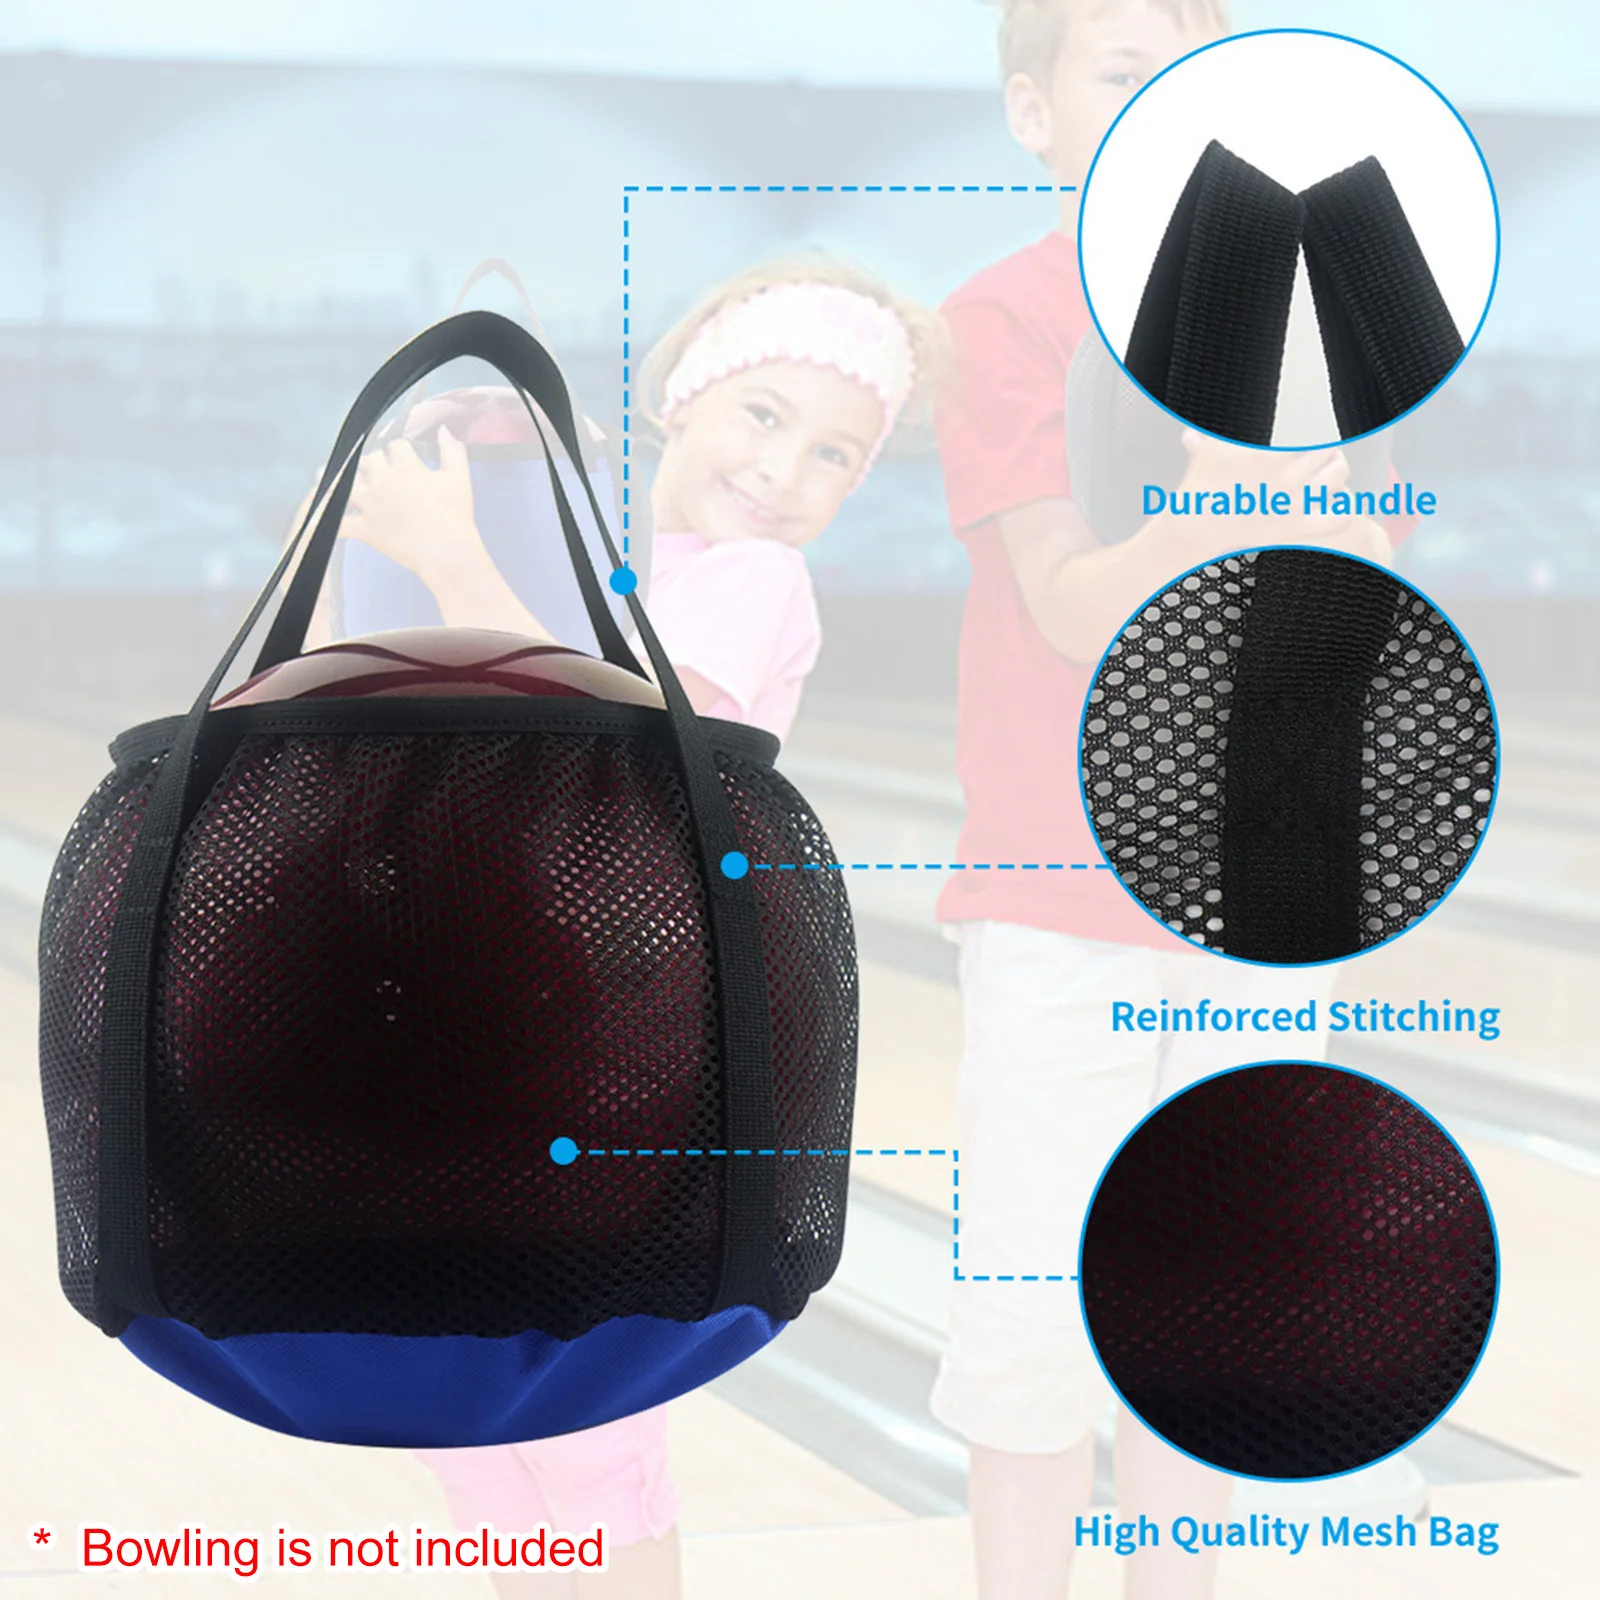 Convenient Bowling Bag Sticky Design As Shown Single Bowling Tote Bag Bowling Rack Small Items Bowling Tote Bag custom retail clothing store display furniture interior design cashier reception counter rack shelves showcase